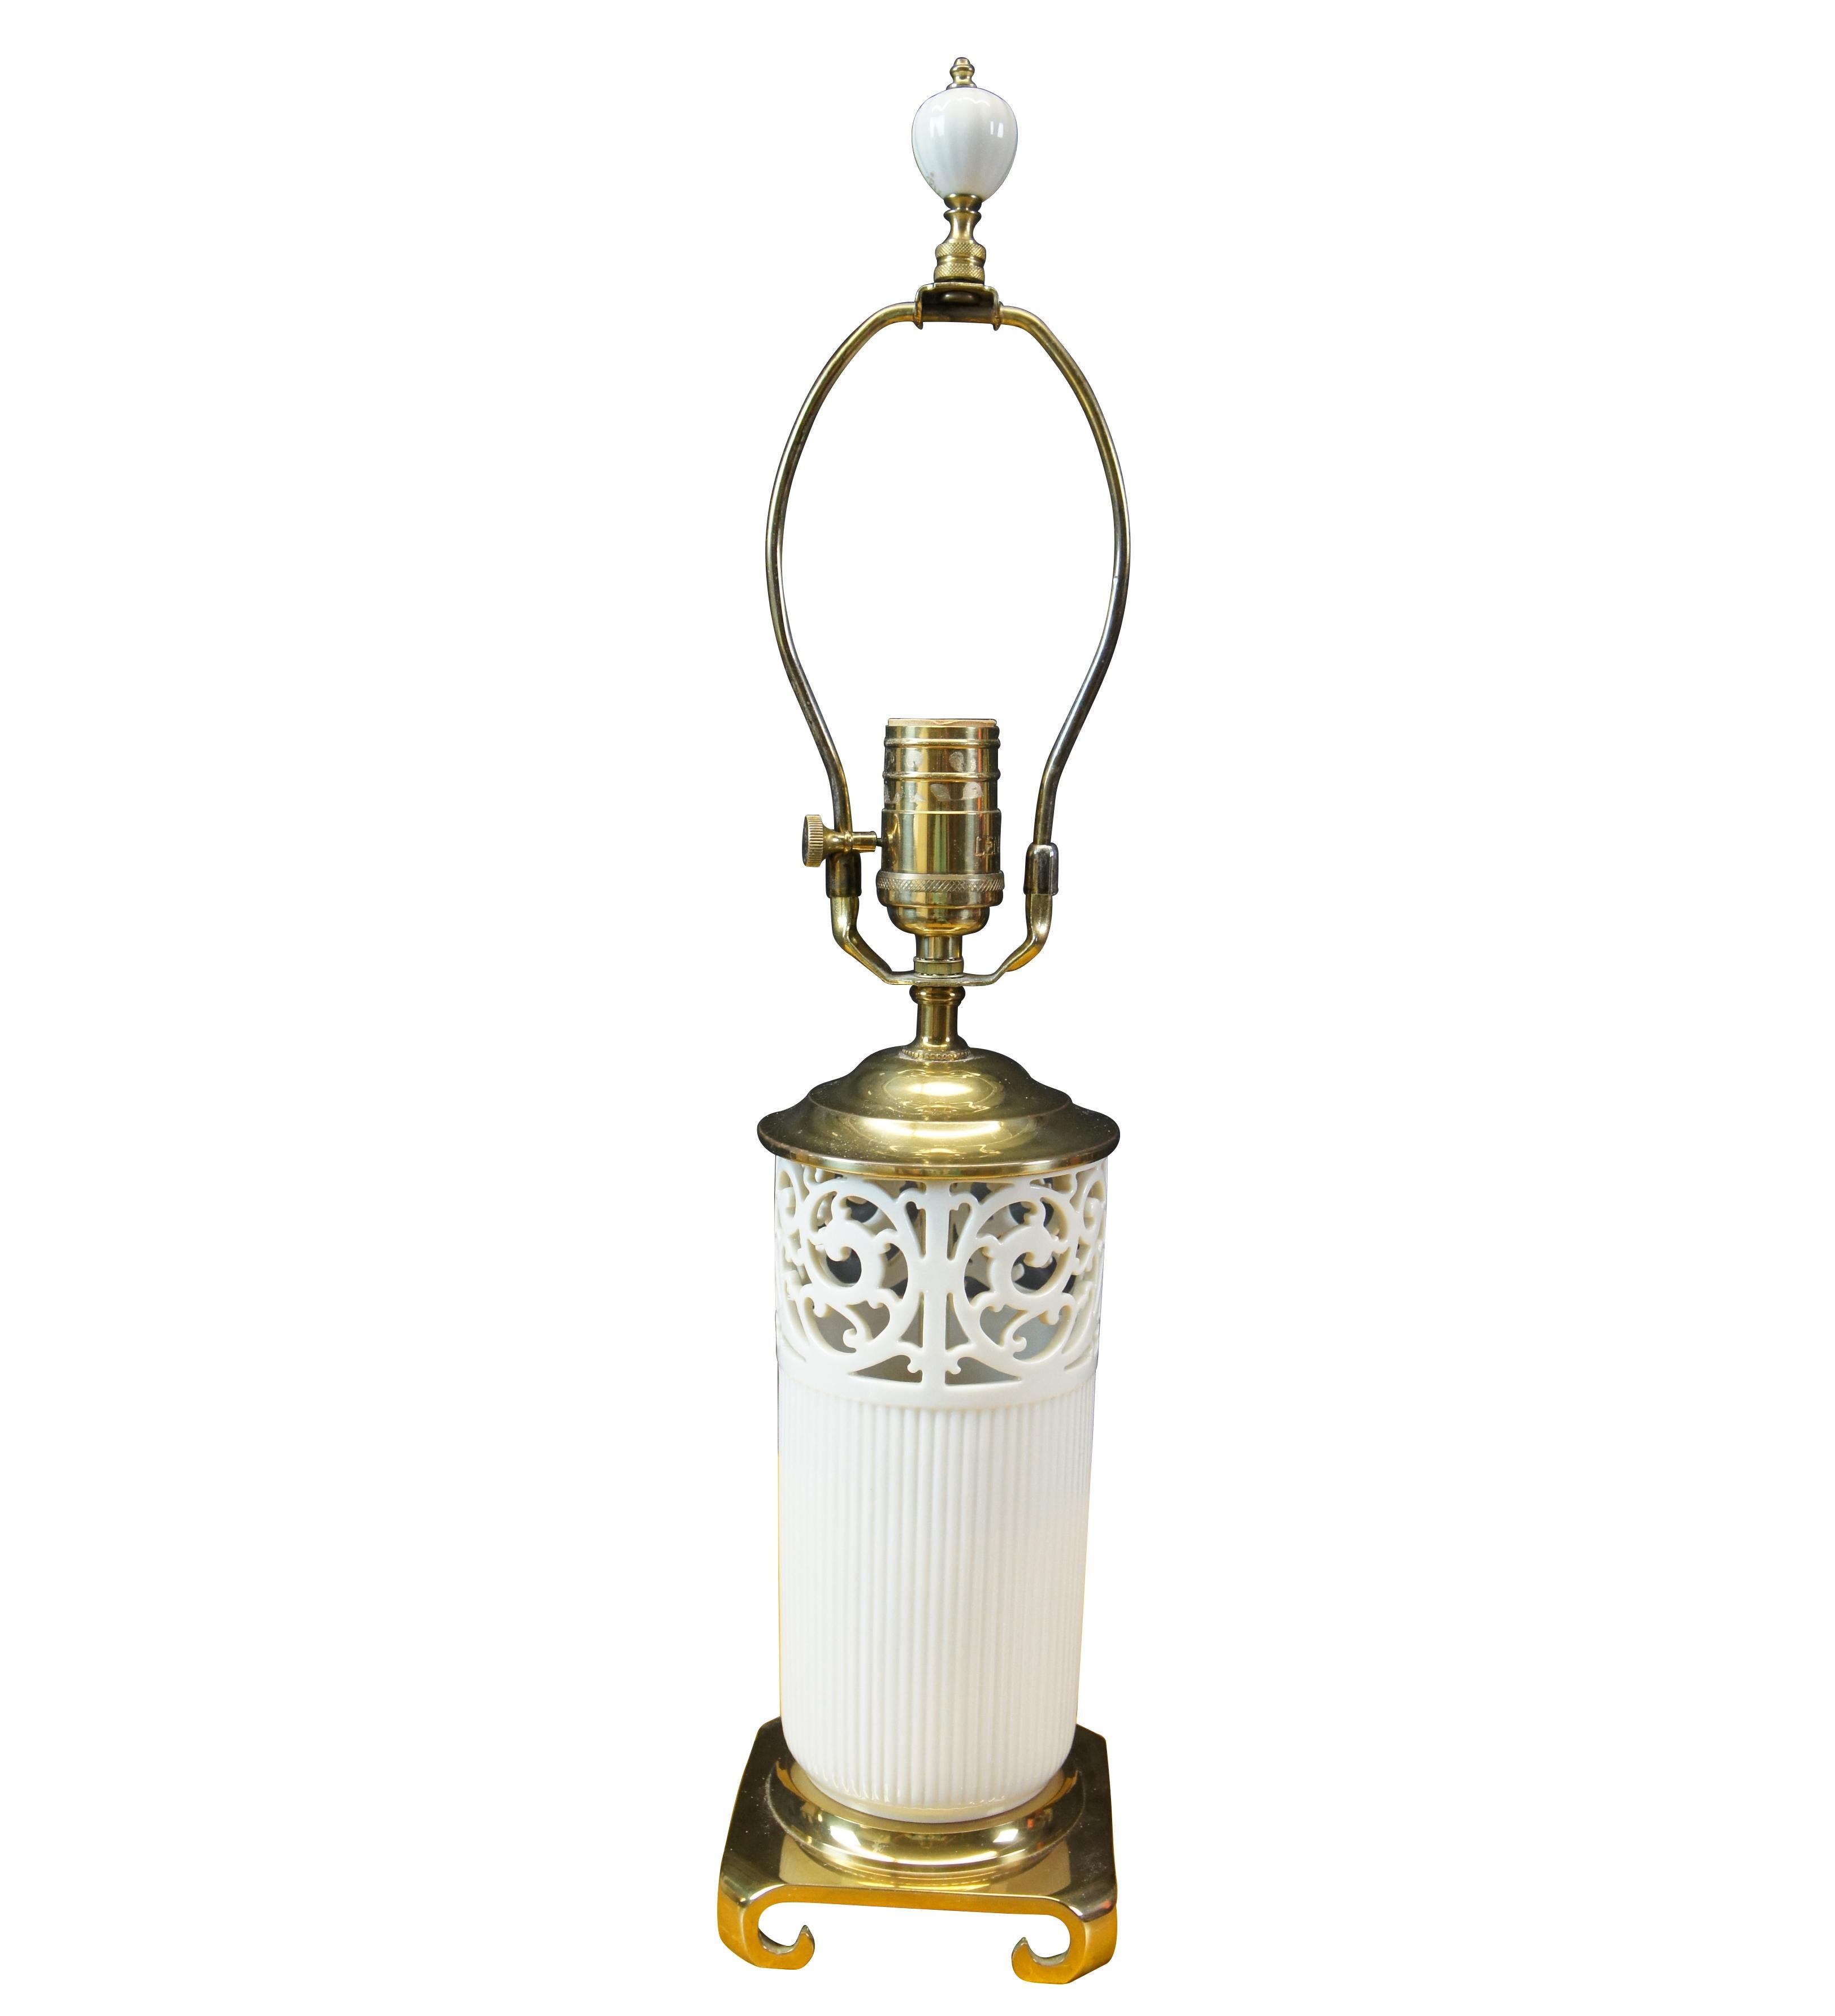 Lenox by Quoizel reticulated porcelain and brass table lamp. circa last quarter 20th century. Includes shade.

Measures: 4.5